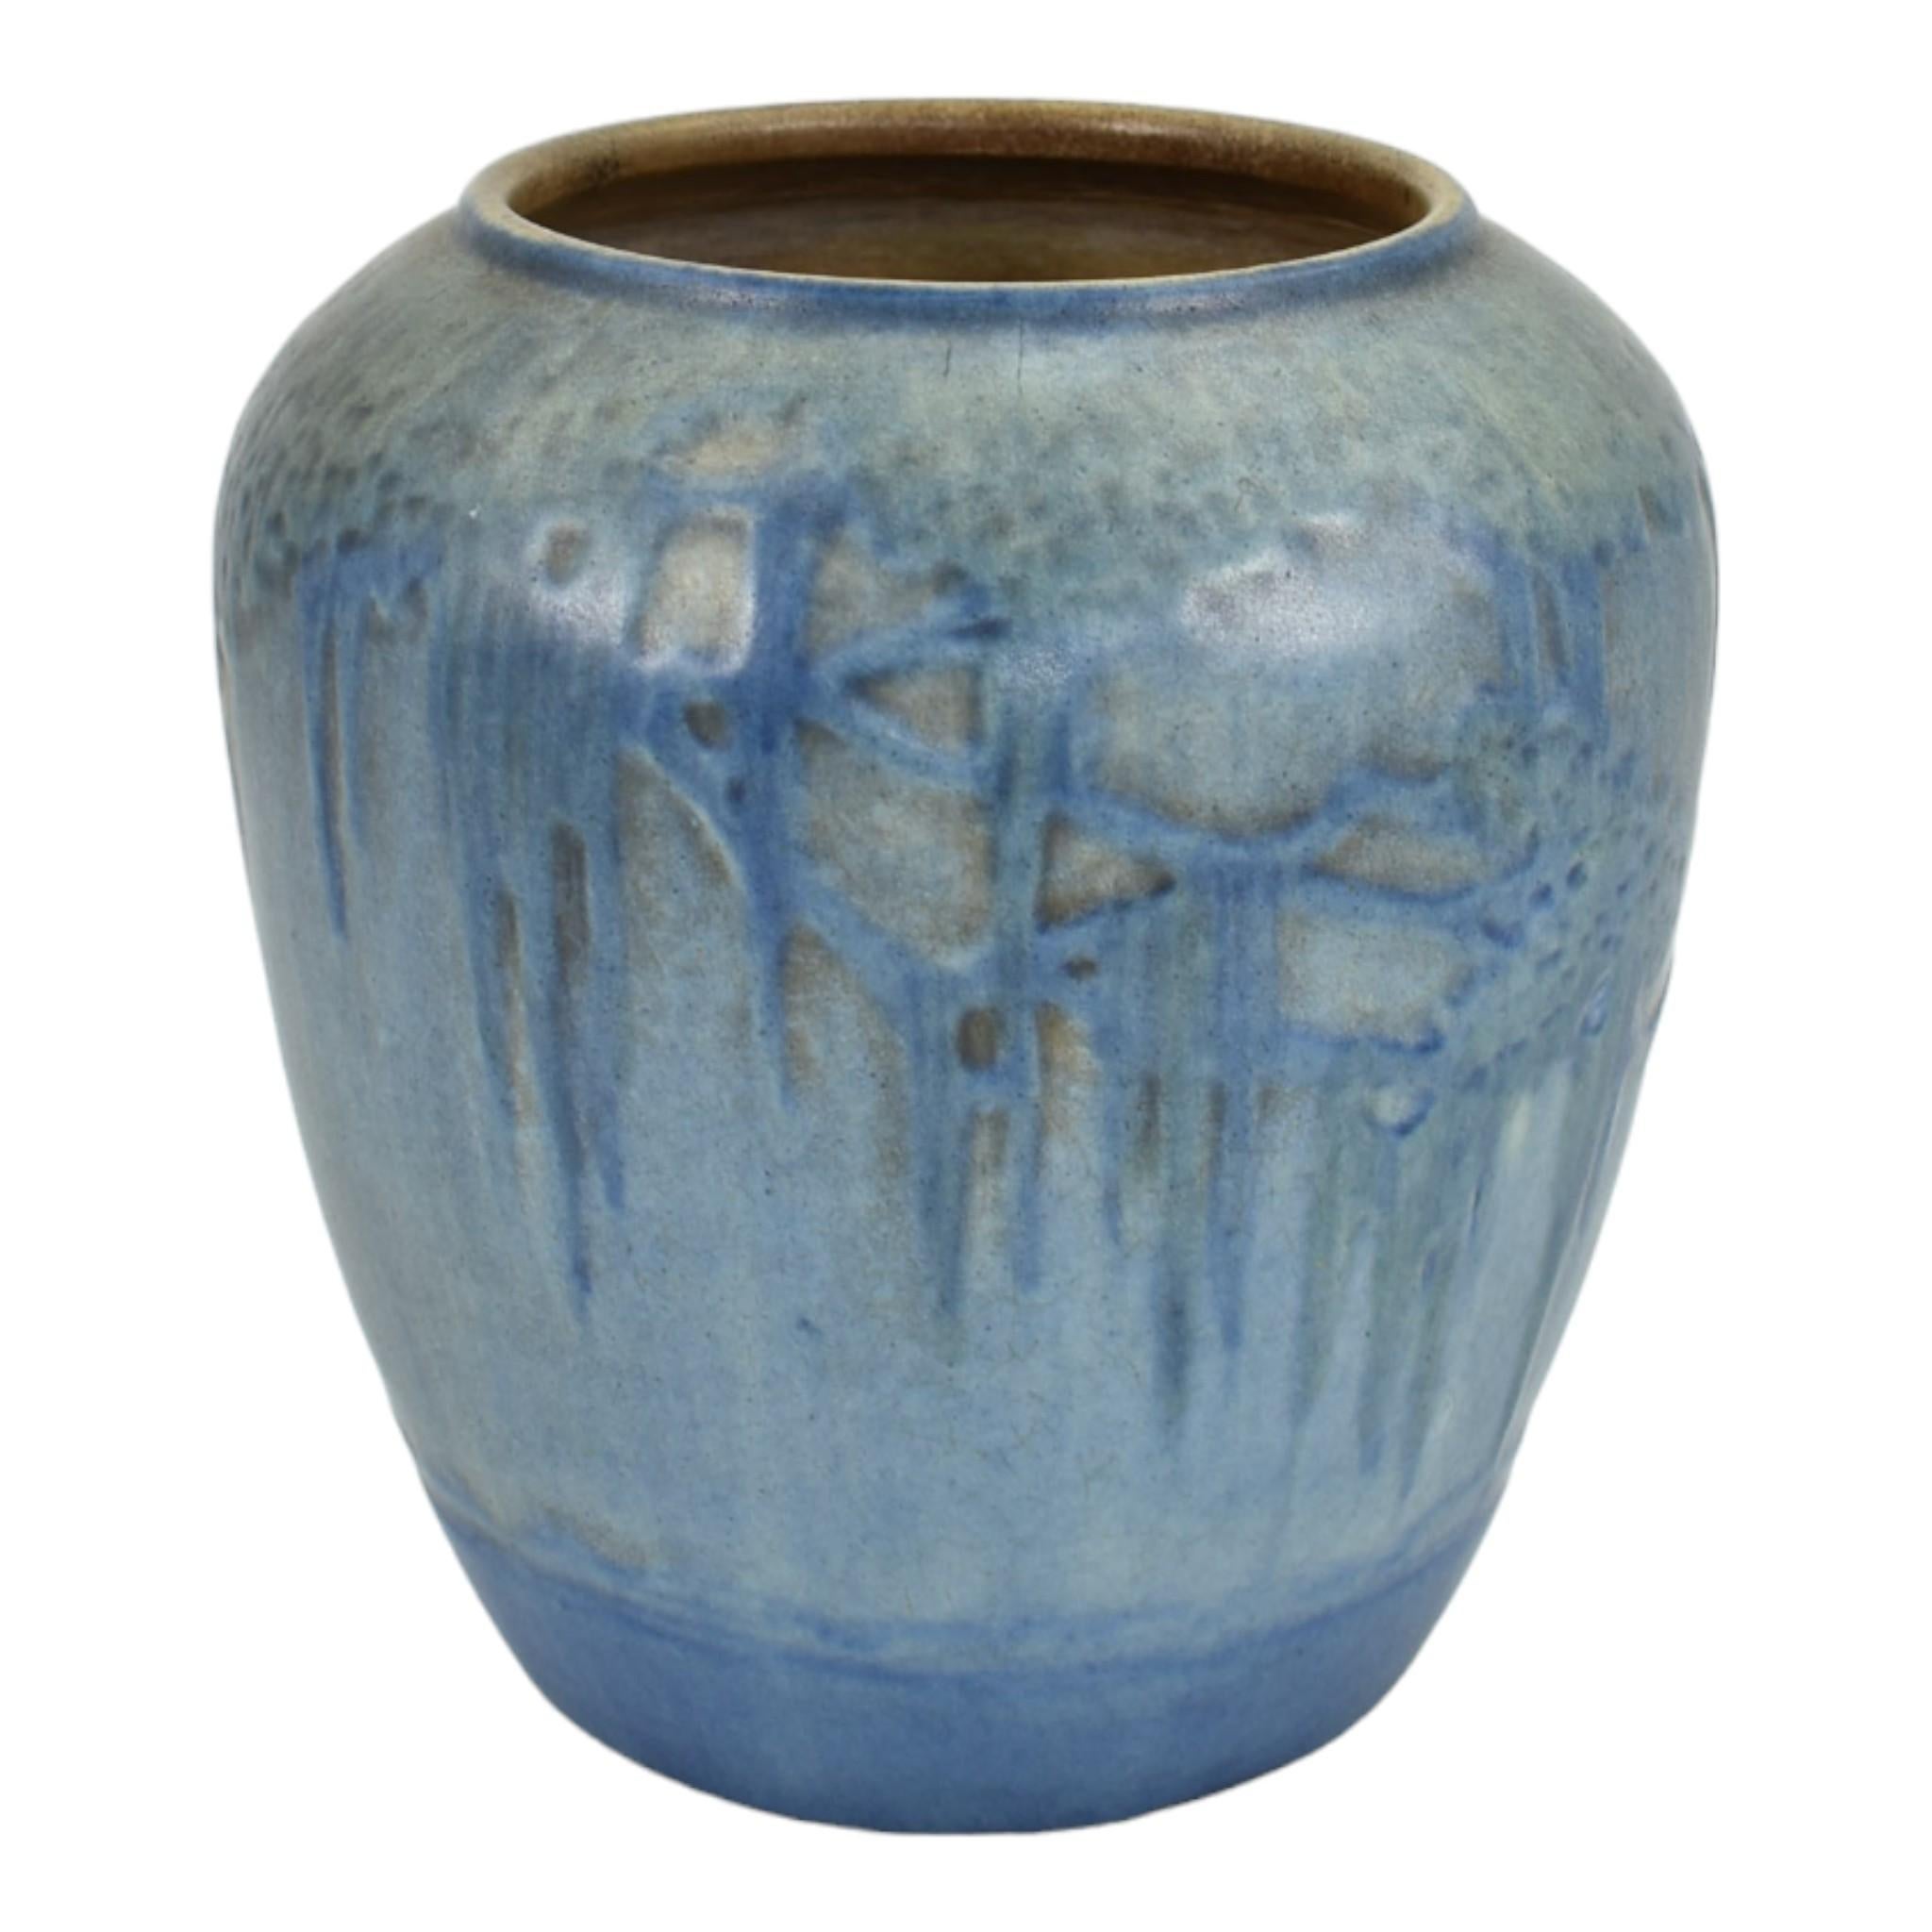 Newcomb College 1930s Arts and Crafts Pottery Blue Moss and Moon Vase Arbo
Nice bulbous vase decorated with moss laden trees and the moon by Aurelia Coralie Arbo.
Excellent original condition. No chips, cracks, damage or repair of any kind.
Bottom